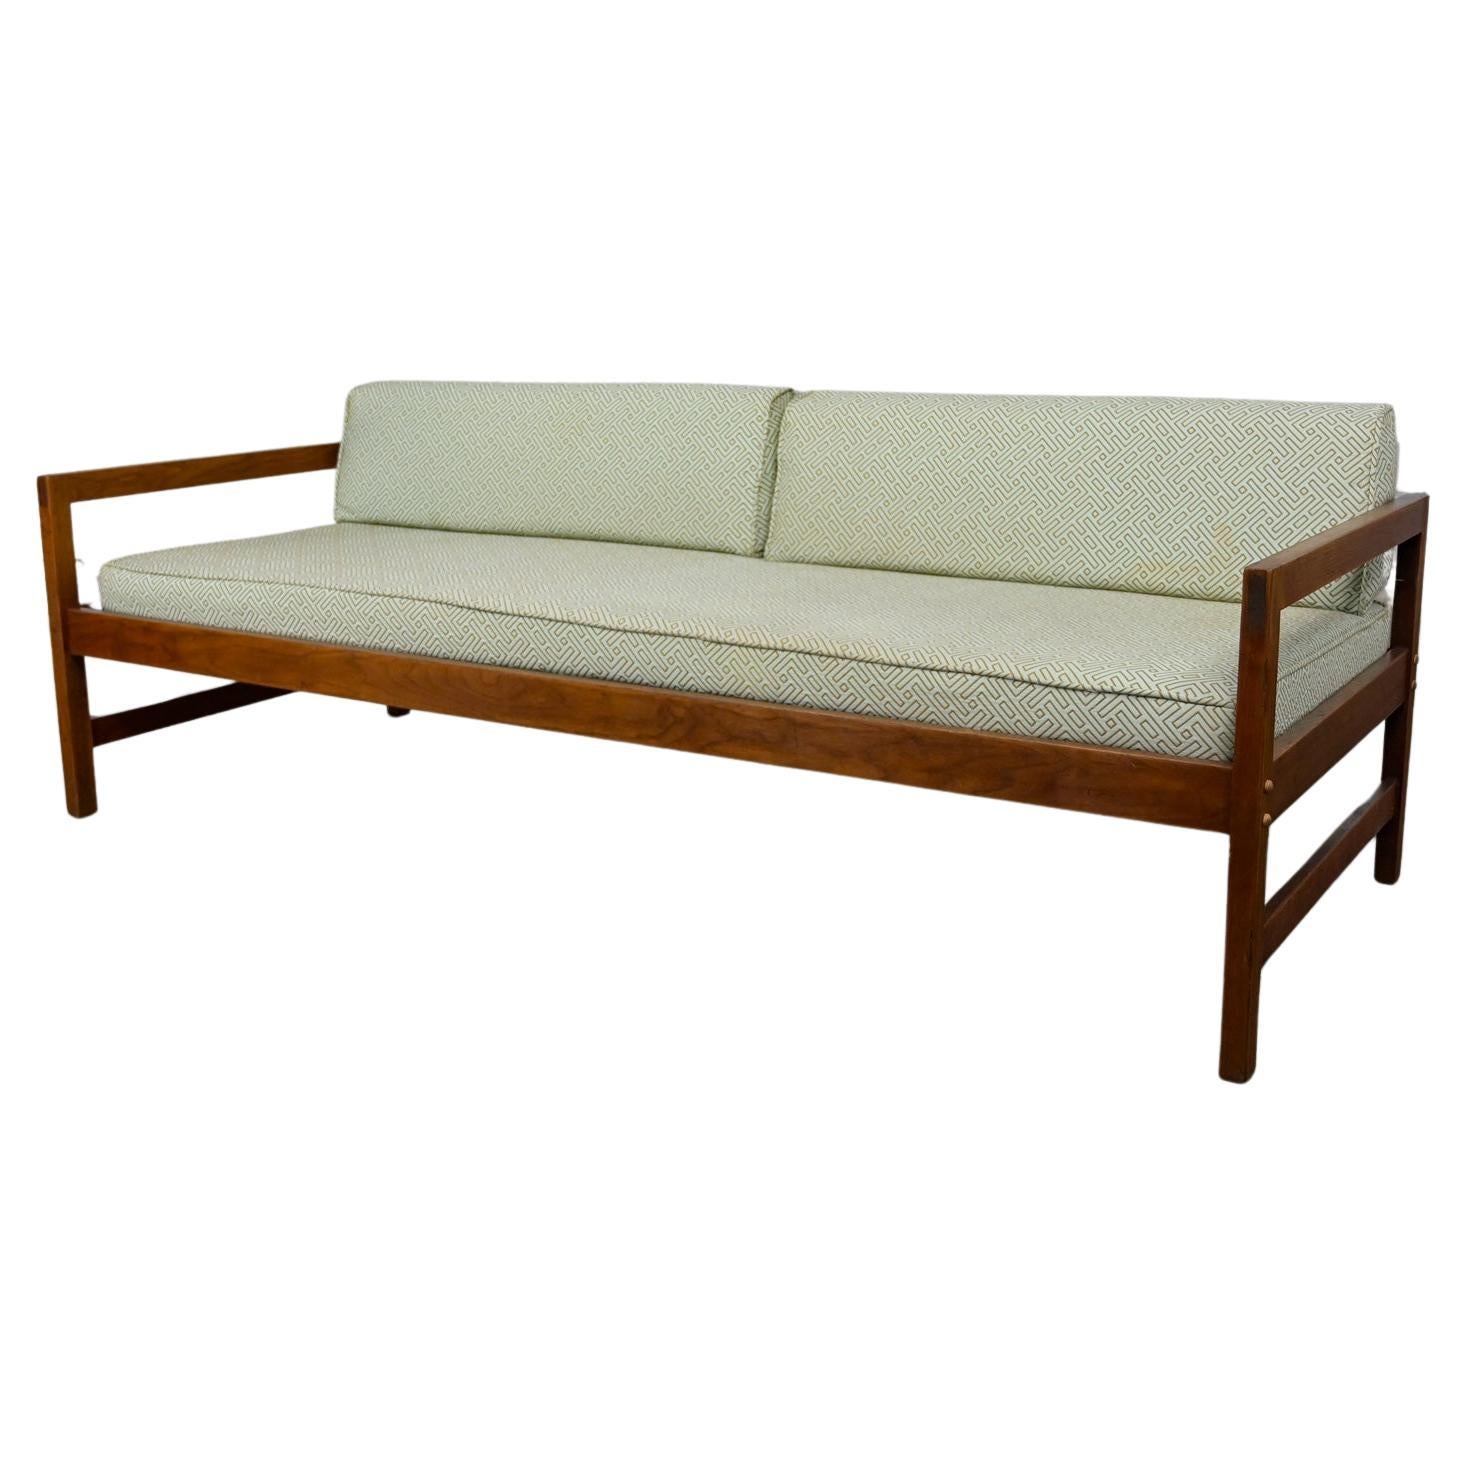 MCM Daybed Sofa Walnut Frame with Arms & Gray-Blue Upholstery & Stram Springs For Sale